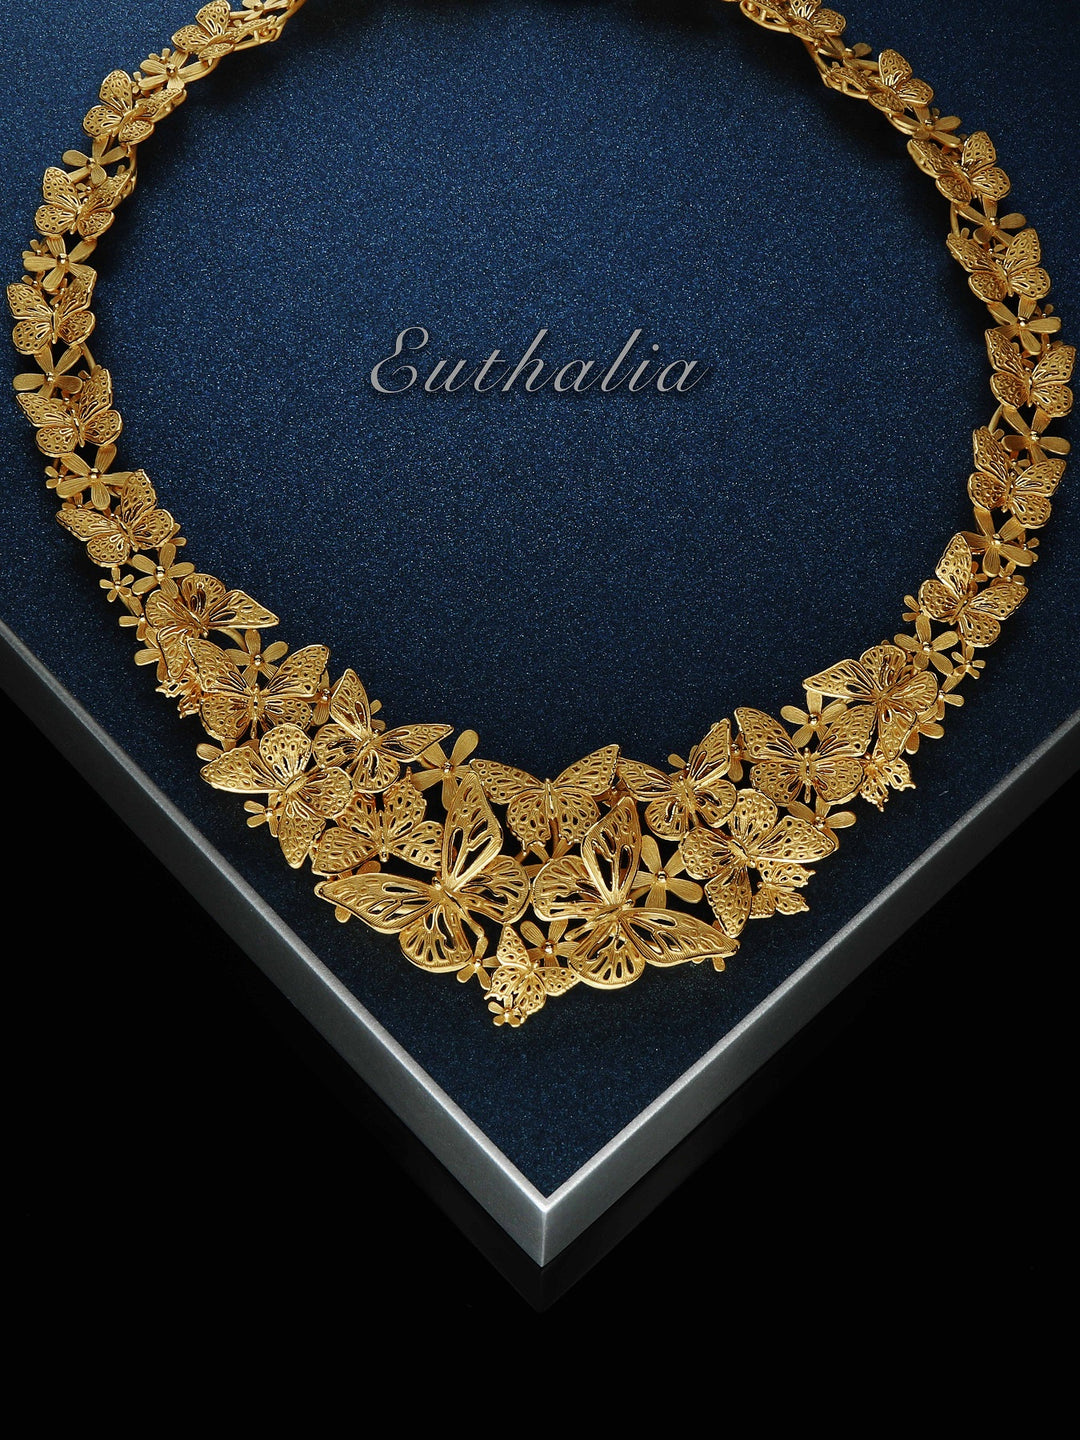 Prima Gold proudly presents the exquisite signature of 24K gold through its latest collection ‘Euthalia’